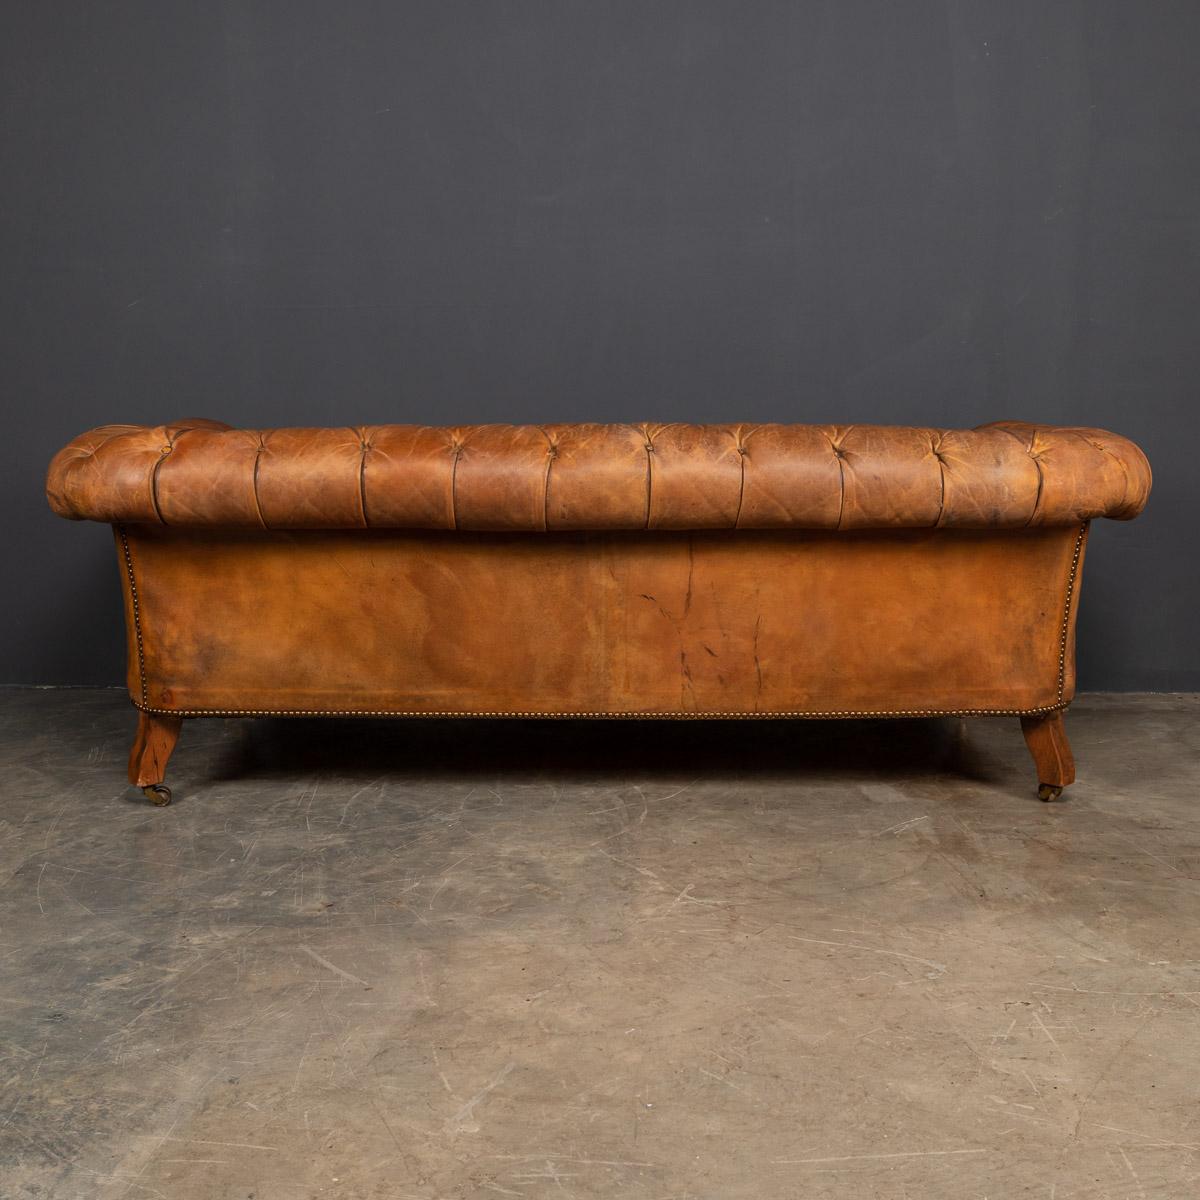 English 20th Century Chesterfield Brown Leather Sofa with Button Down Seats, 1910s